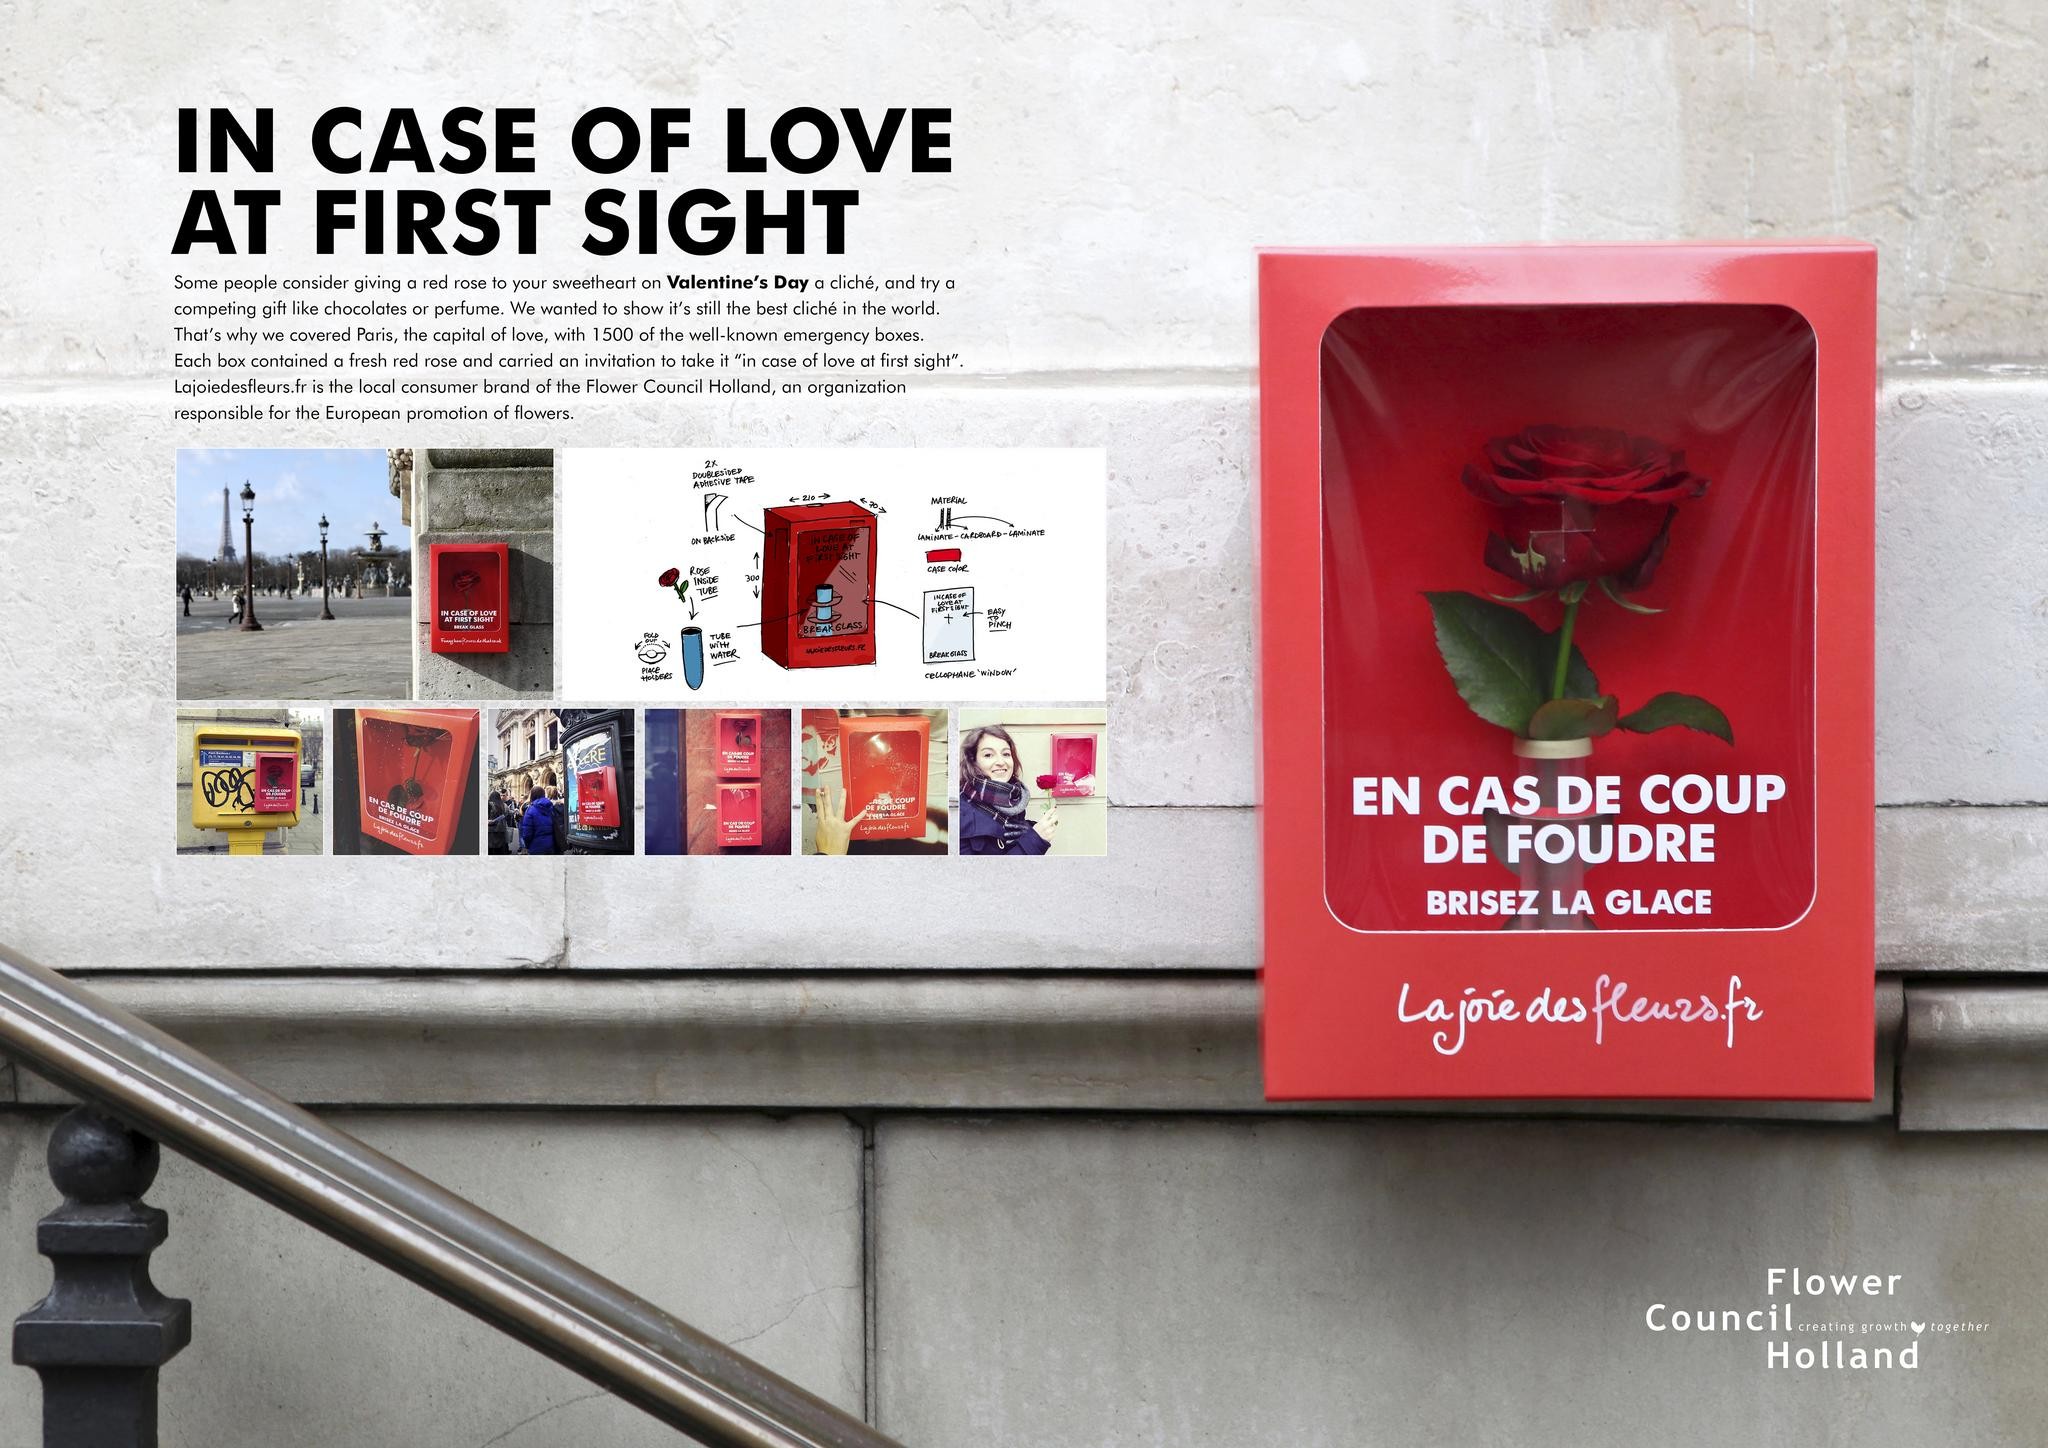 IN CASE OF LOVE AT FIRST SIGHT